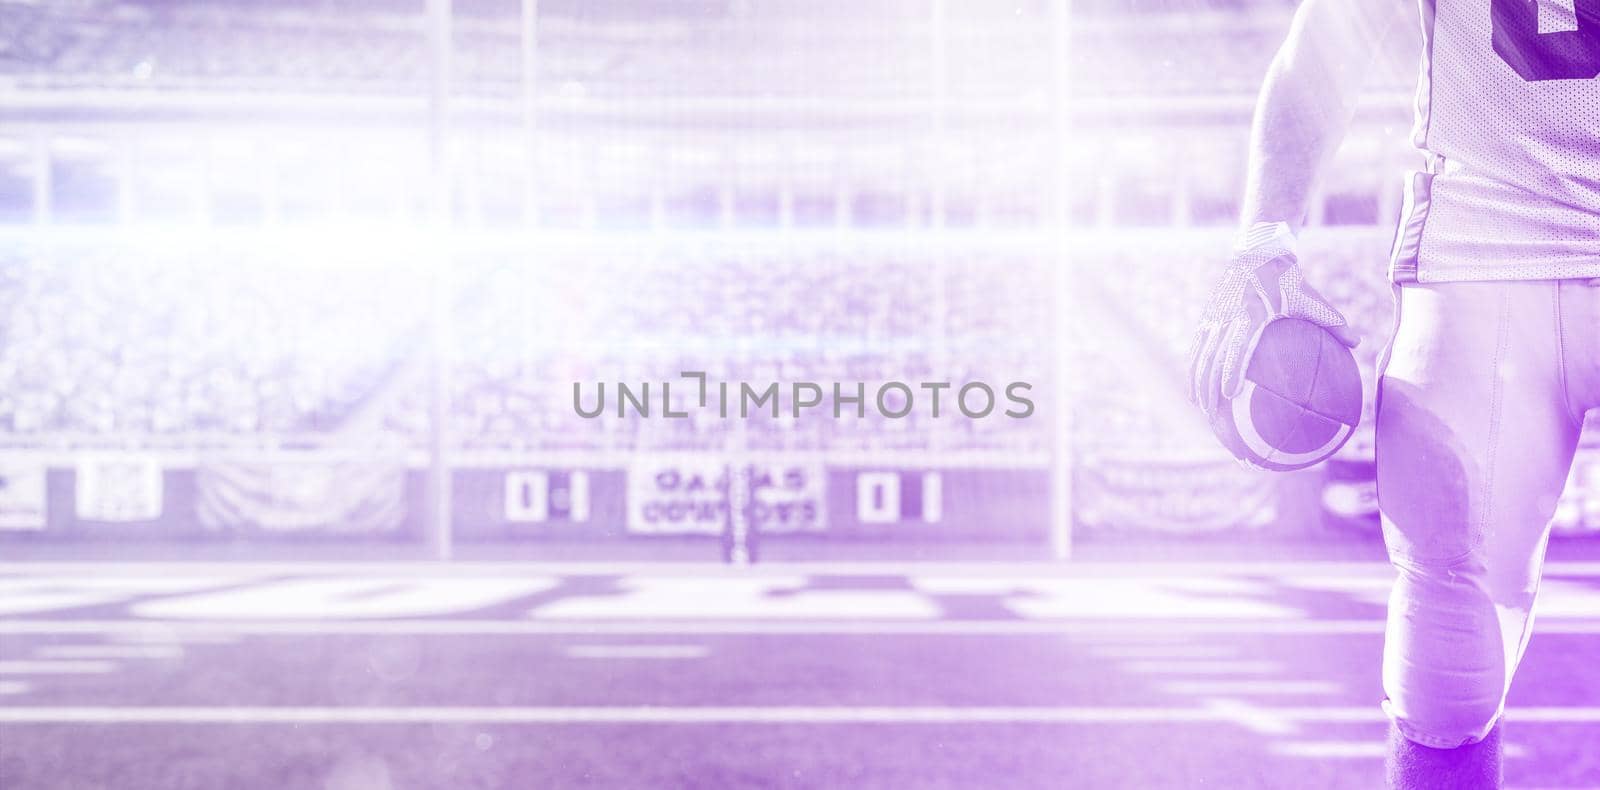 Closeup Portrait of a strong muscular American Football Player on big modern stadium field with lights and flares